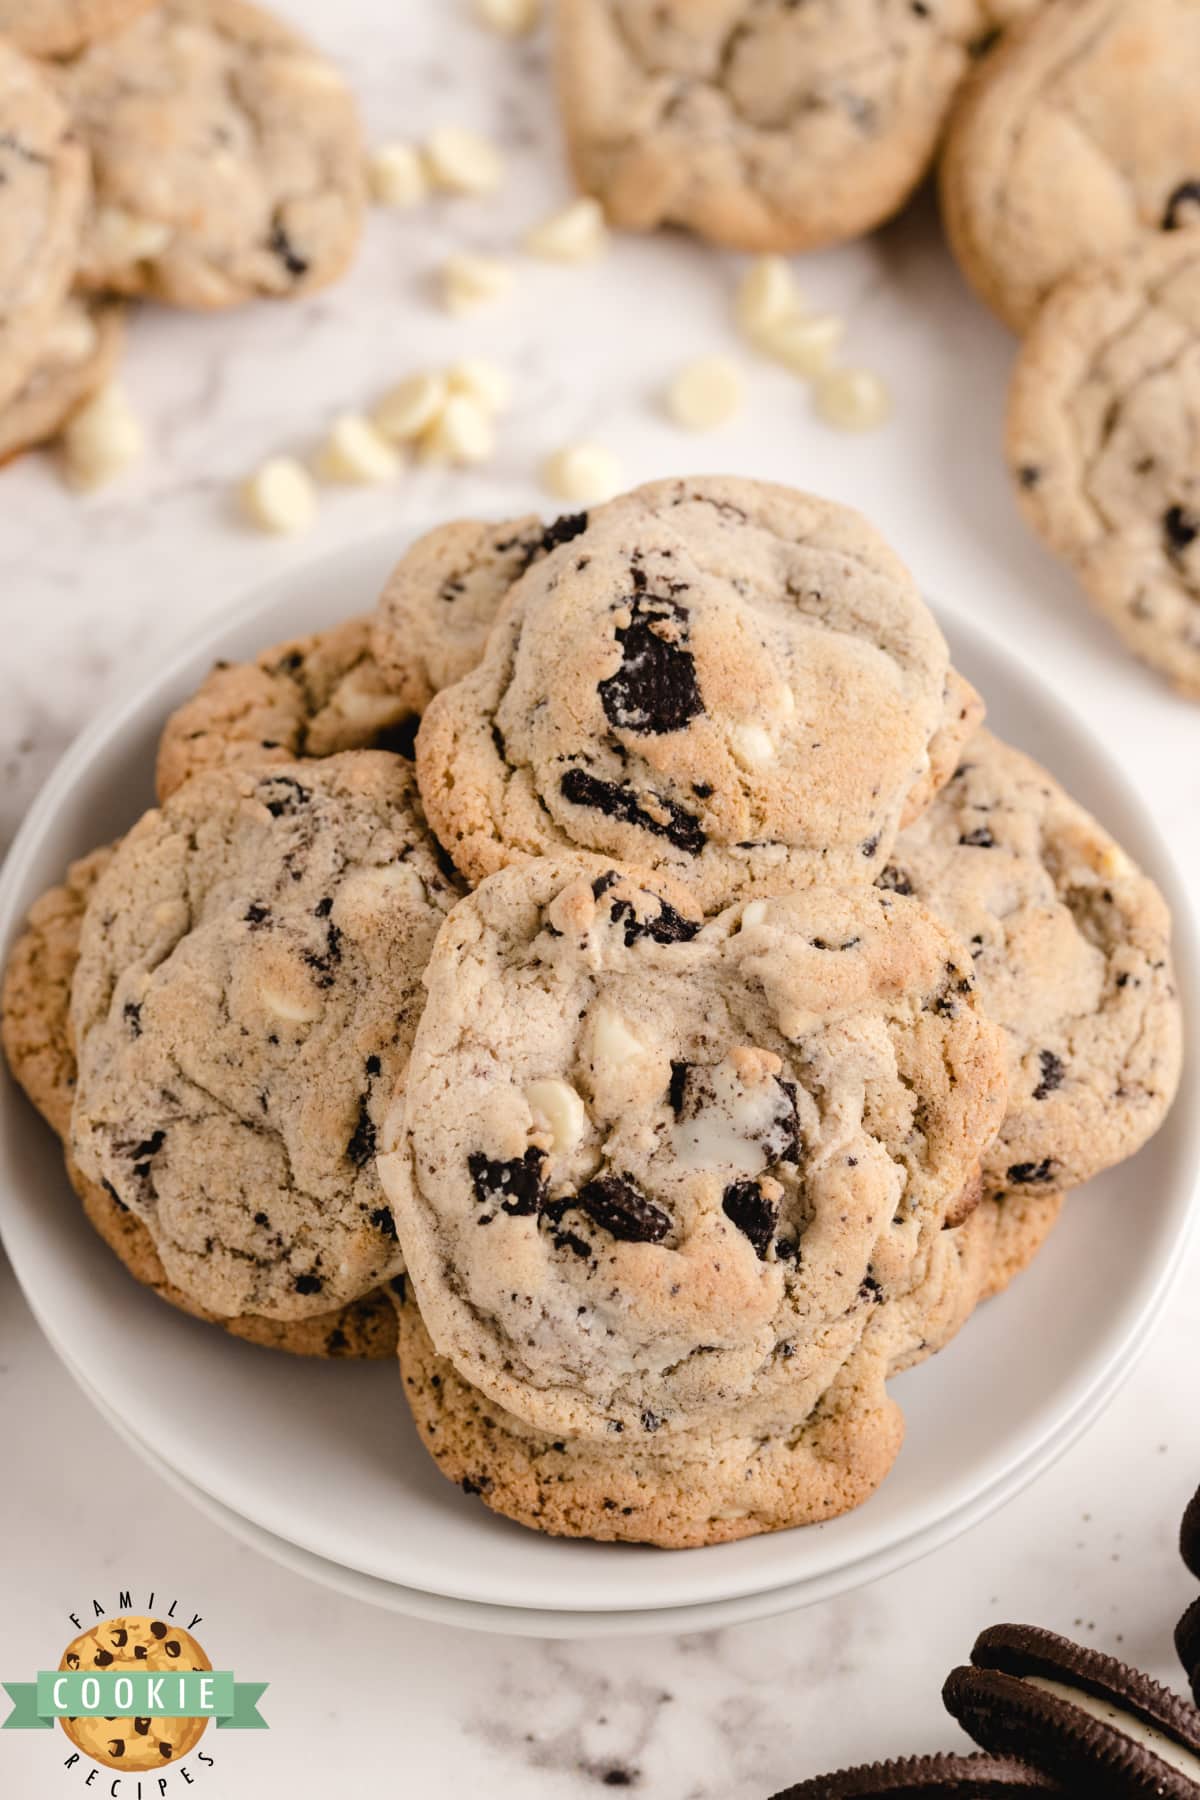 Cookies with Oreo pudding mix and crushed Oreo cookies